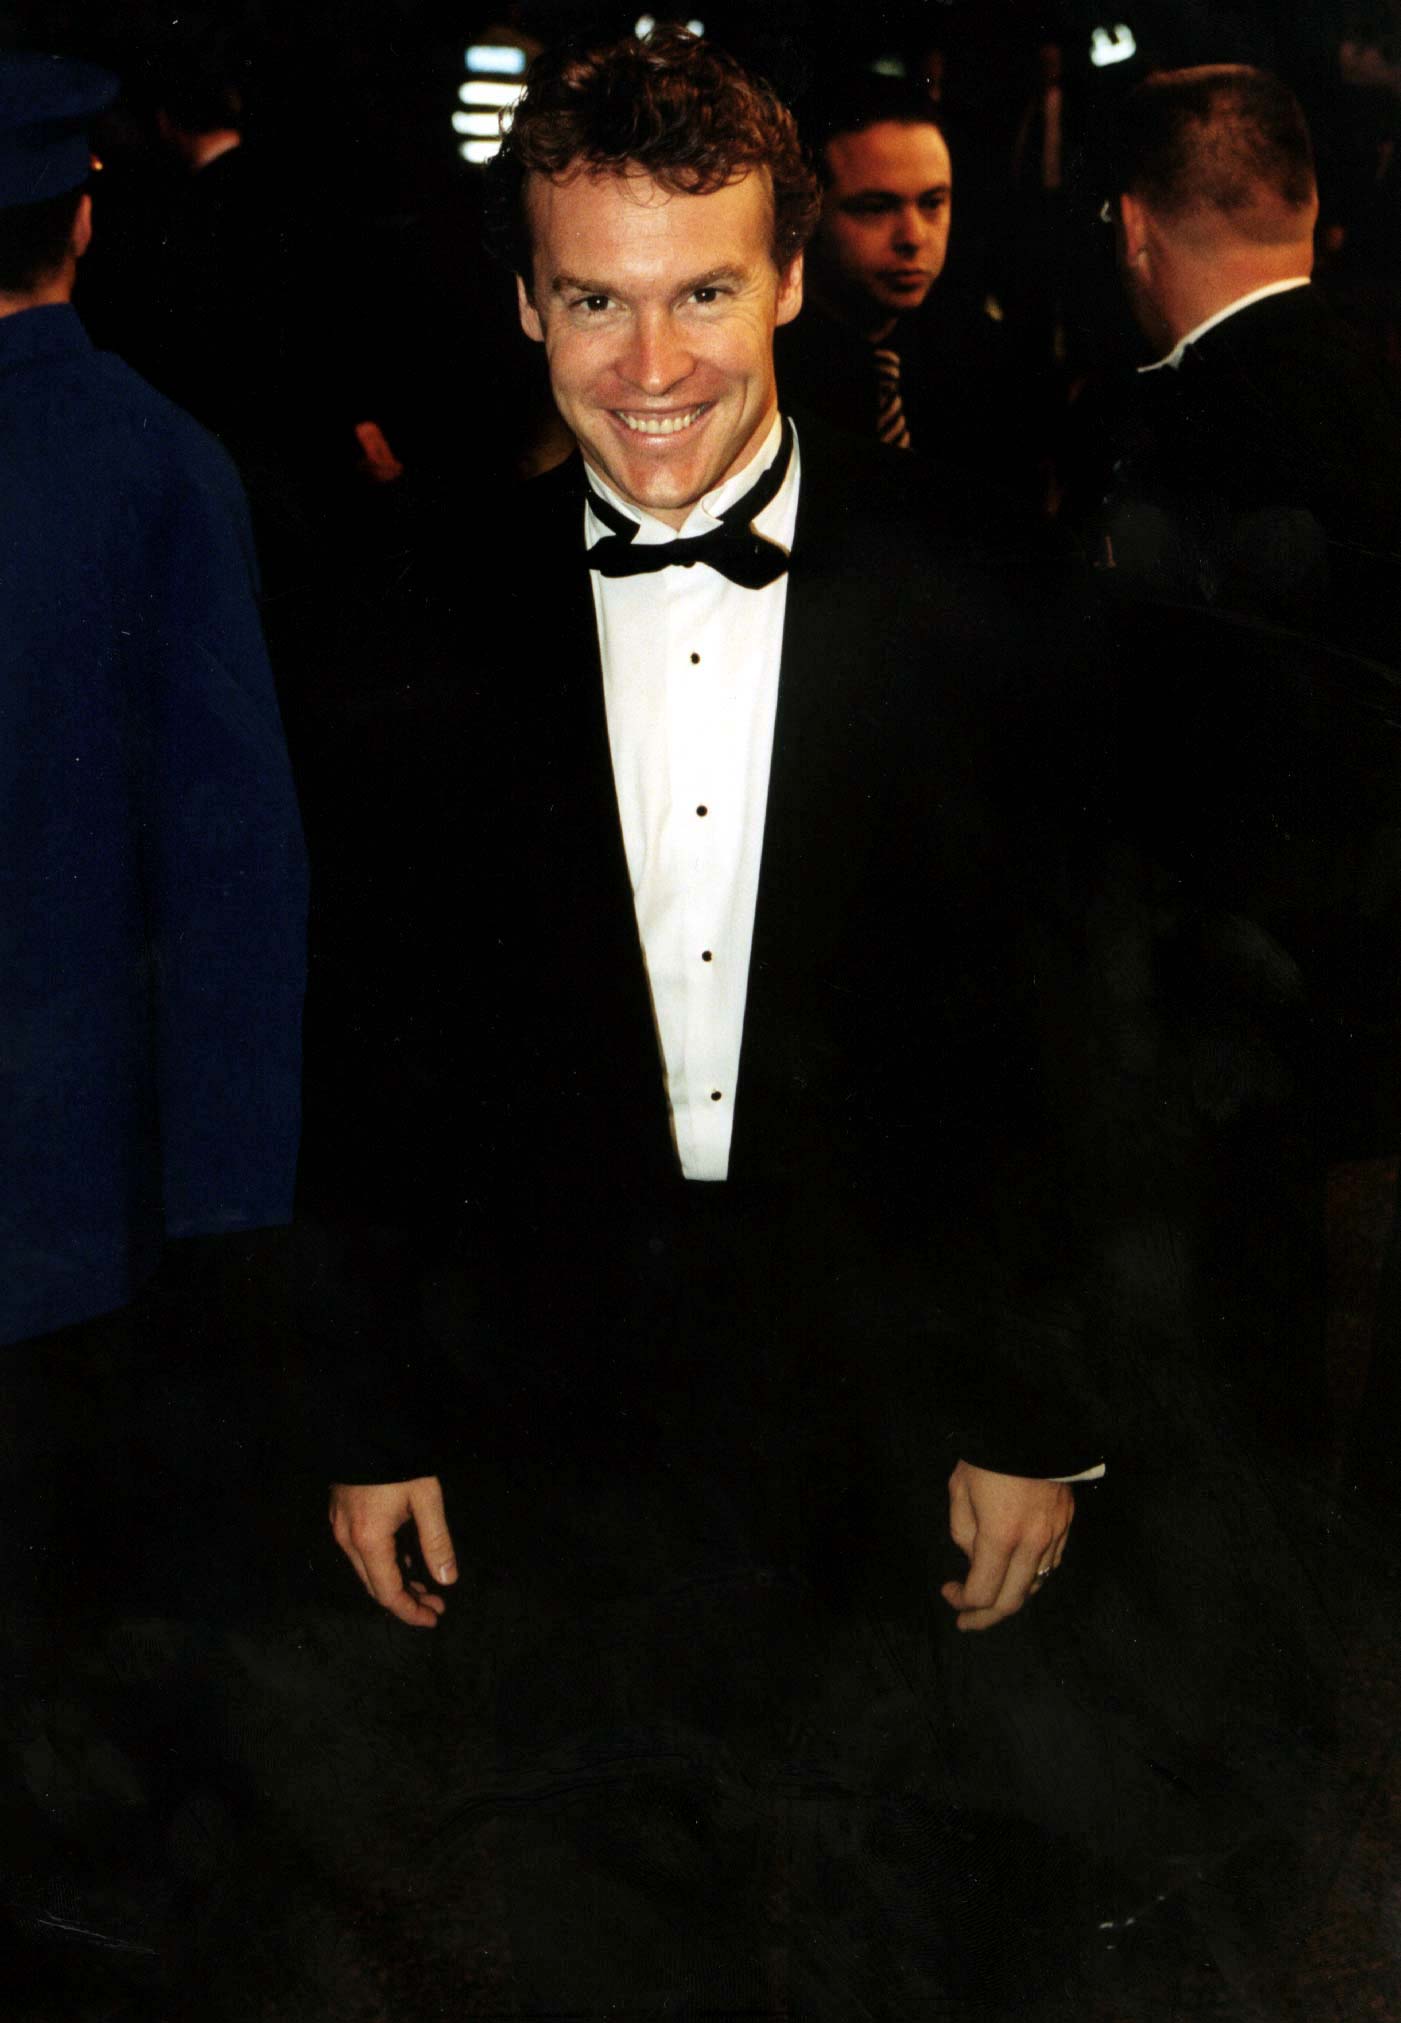 Tate Donovan attends the premiere of "Hercules" in Leicester Square, London on September 10, 1997 | Source: Getty Images